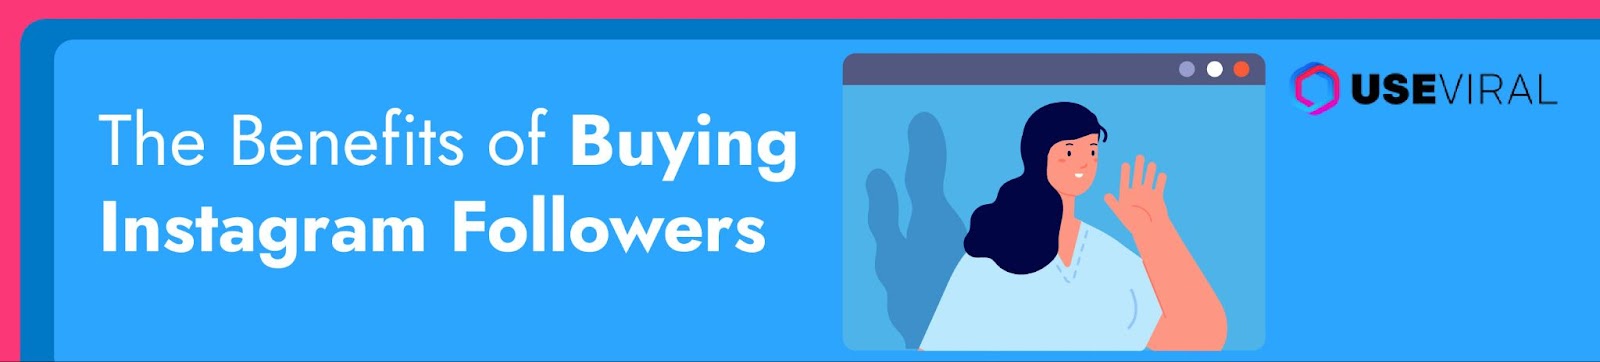 The Benefits of buying Instagram followers